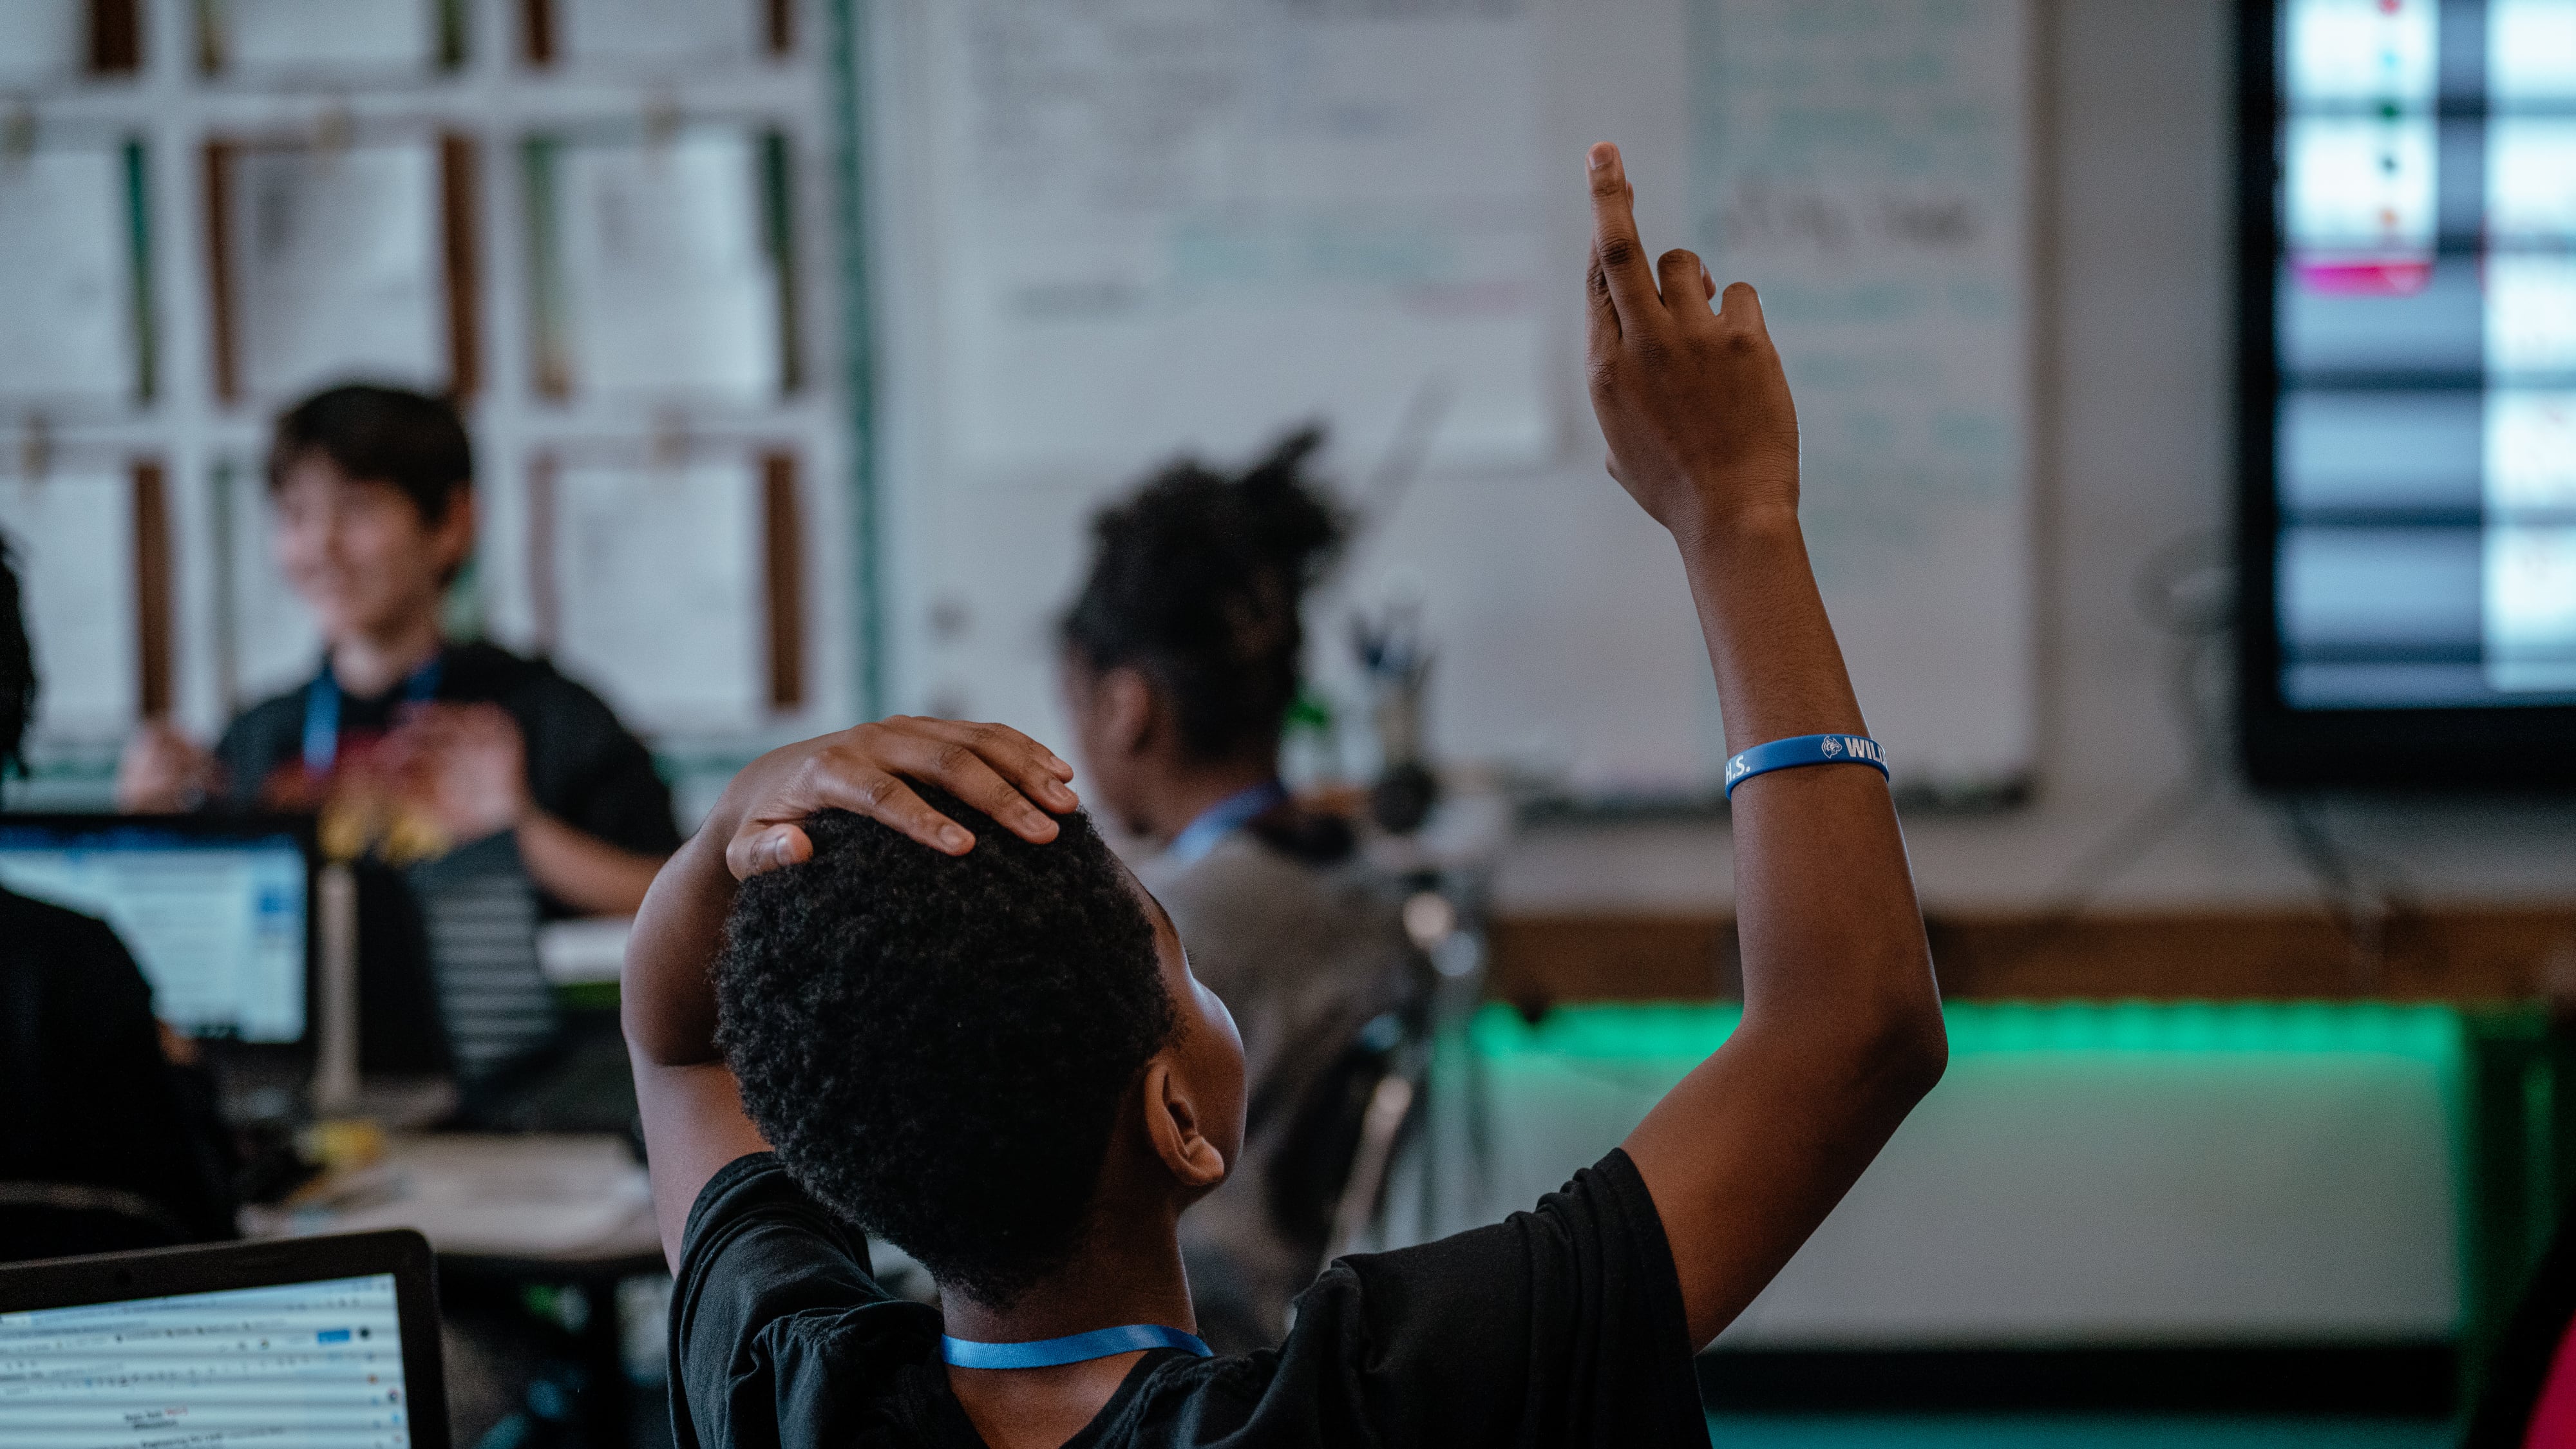 A back view of a student raising their hand in a classroom with other students in the background.